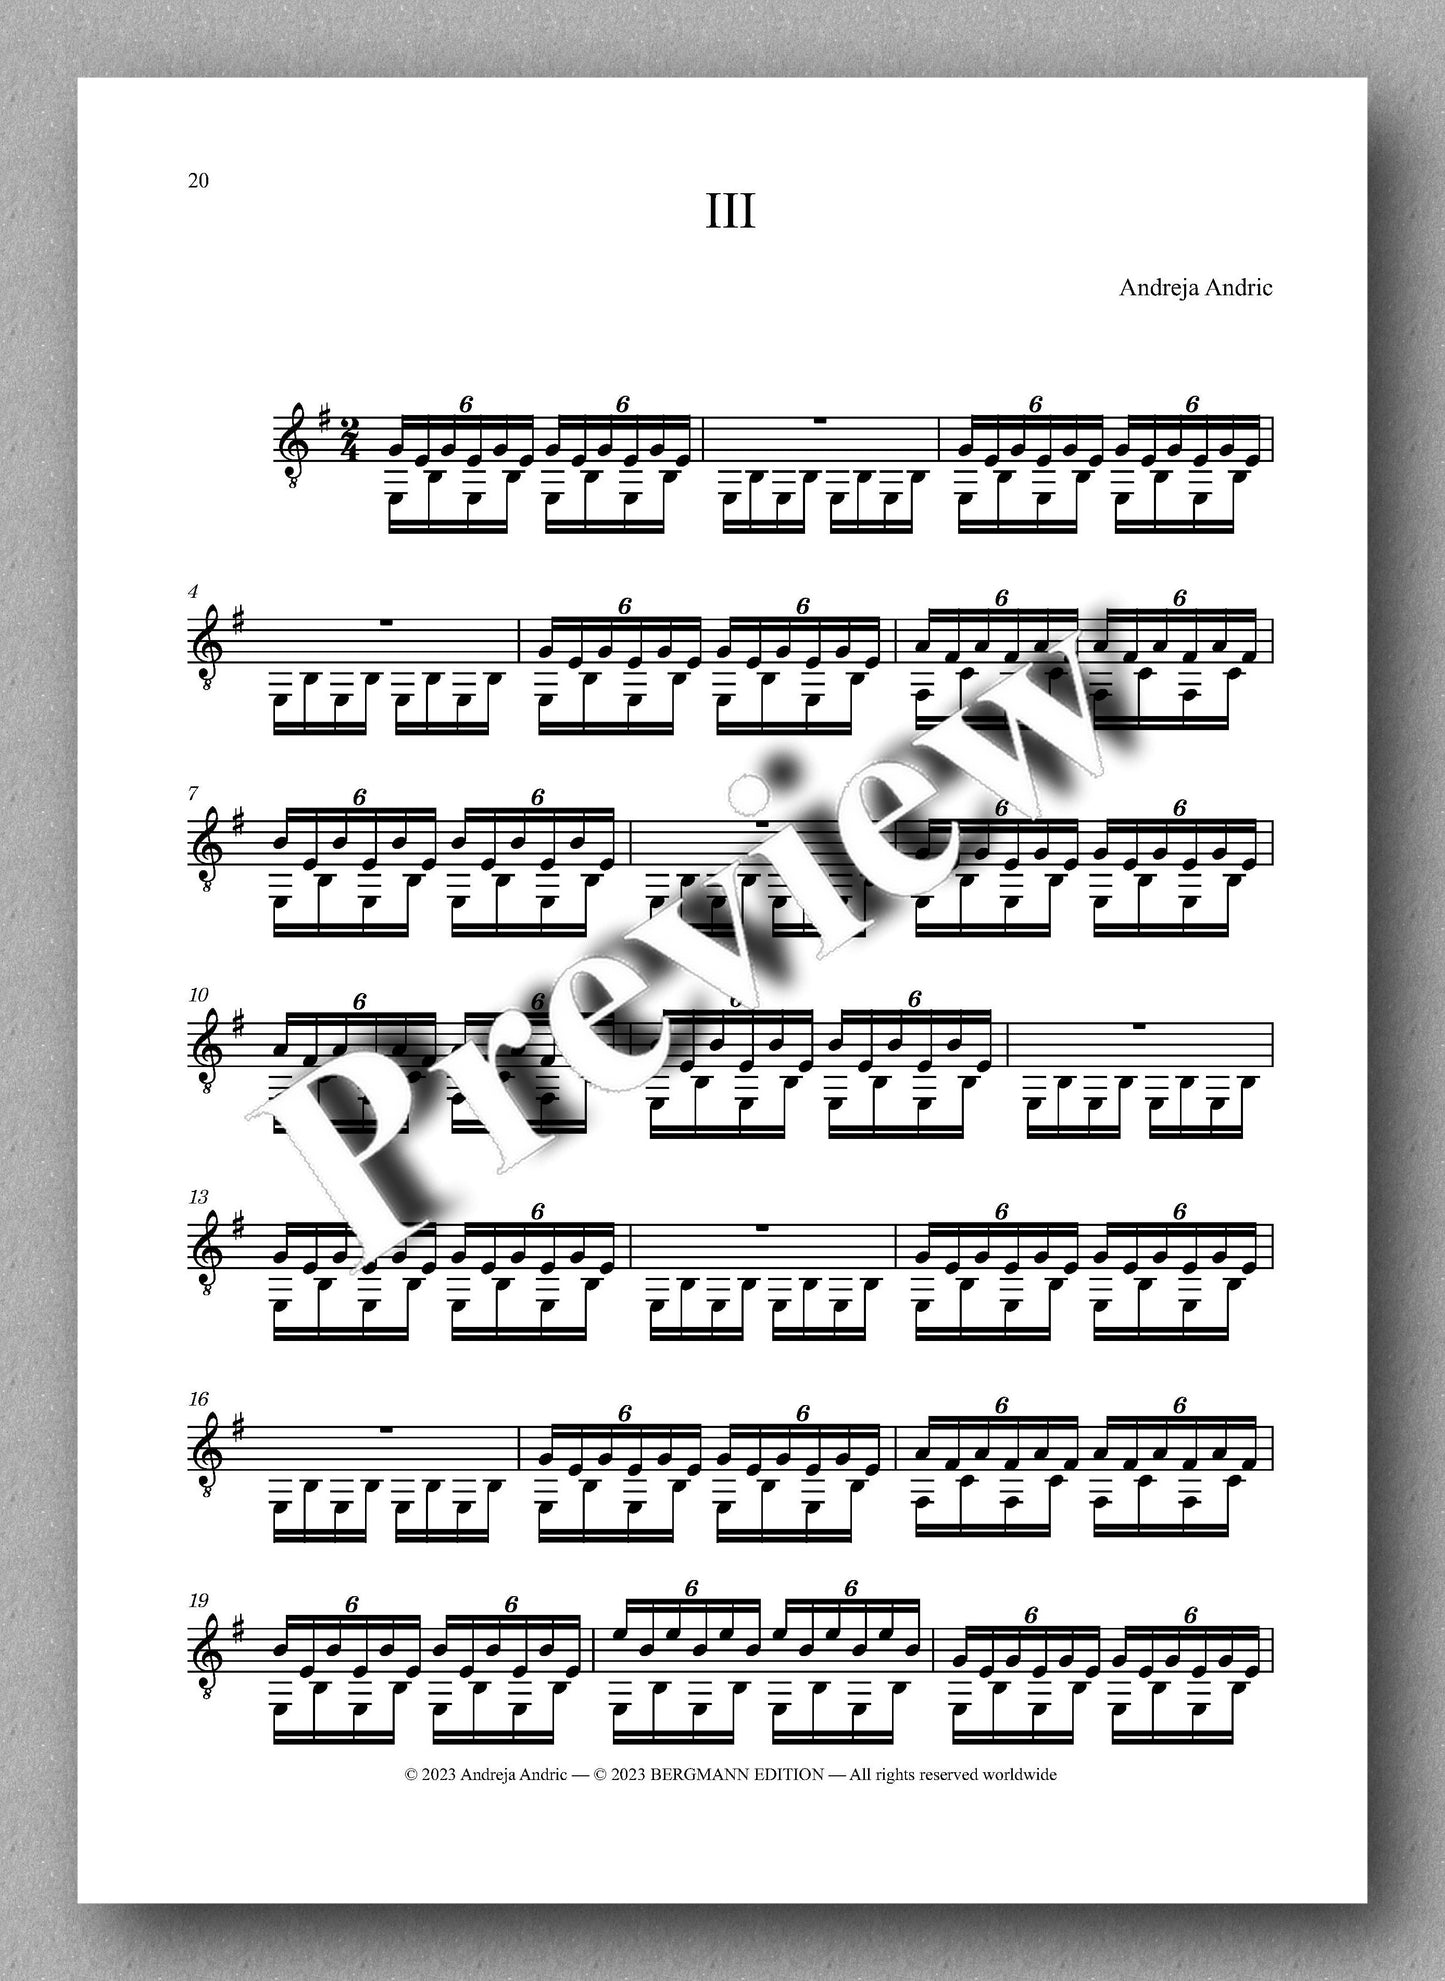 Four Quiet Studies, by Andreja Andric - preview of the music score 3